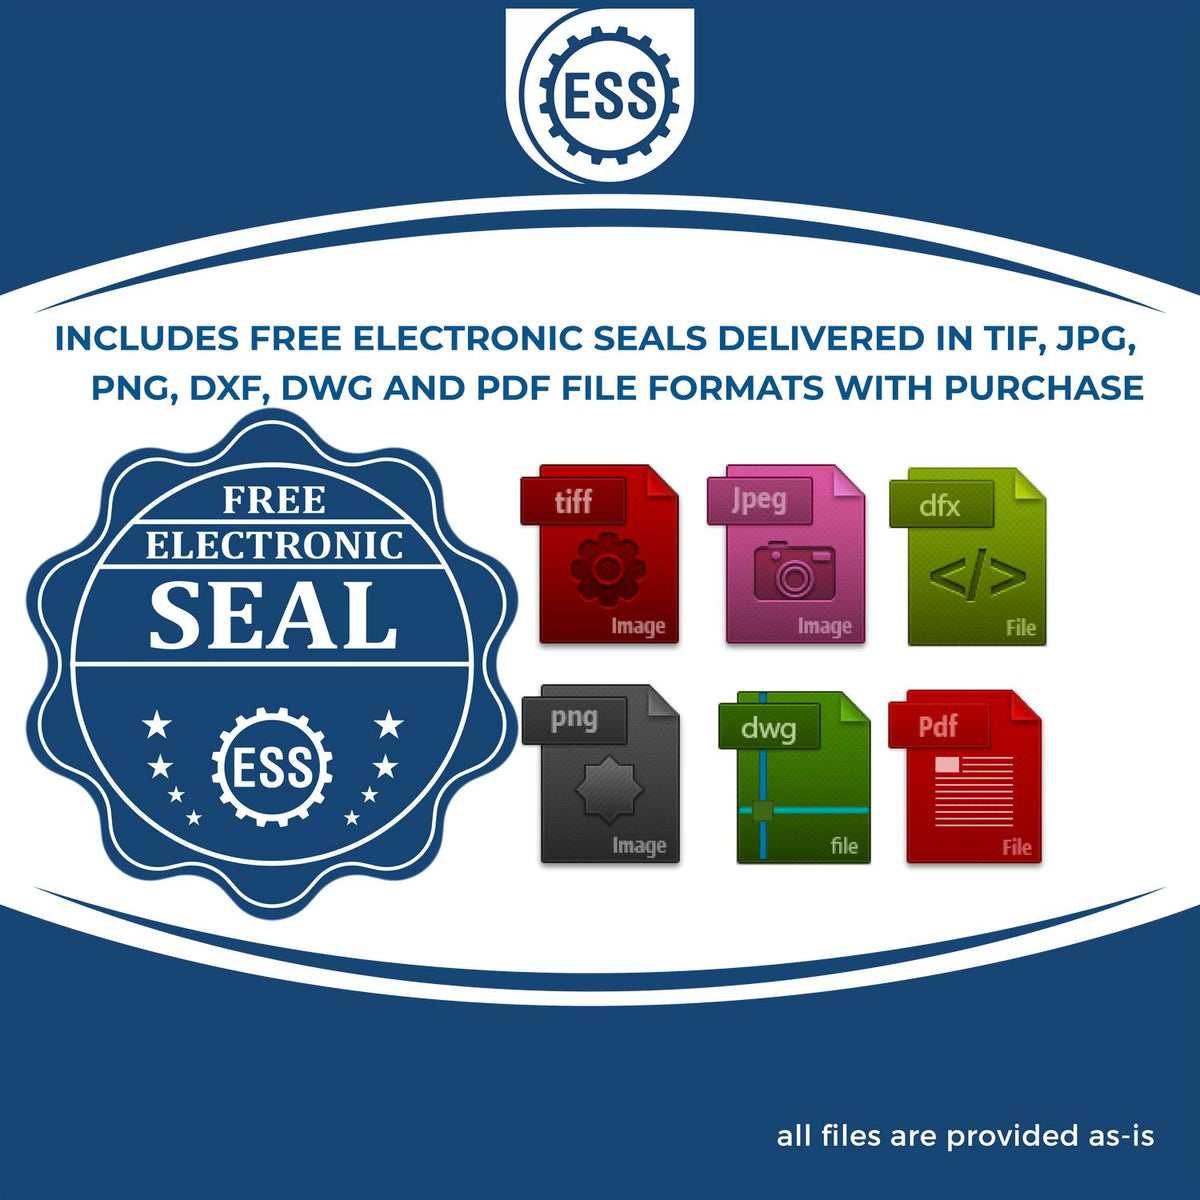 An infographic for the free electronic seal for the Premium MaxLight Pre-Inked Idaho Landscape Architectural Stamp illustrating the different file type icons such as DXF, DWG, TIF, JPG and PNG.